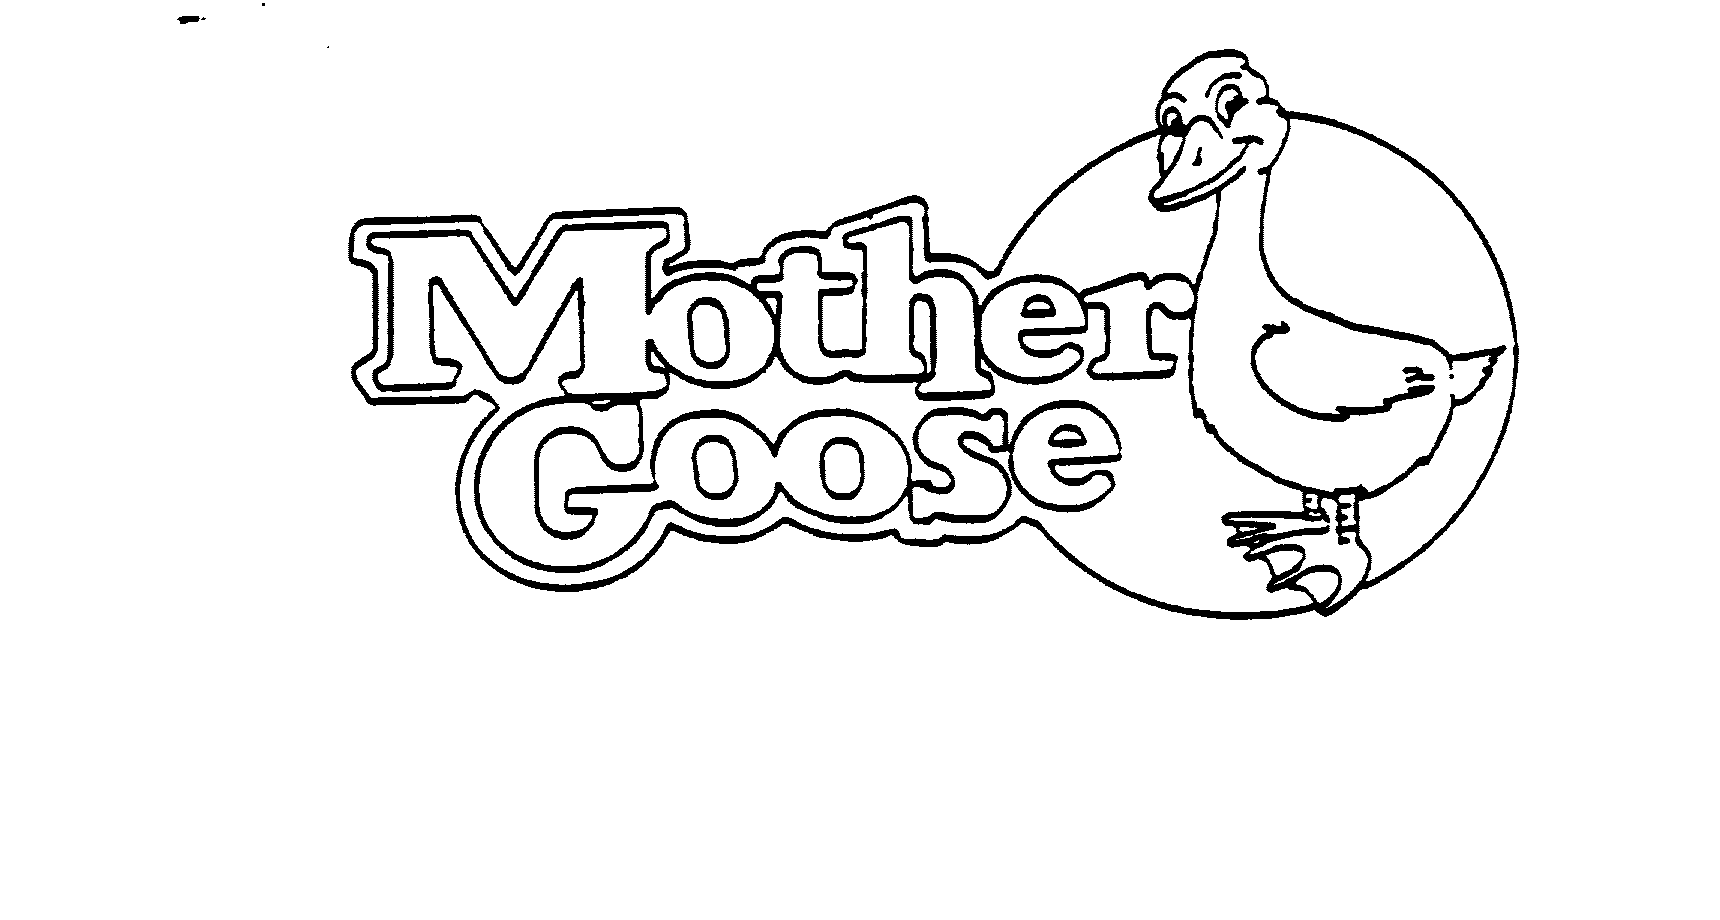 MOTHER GOOSE